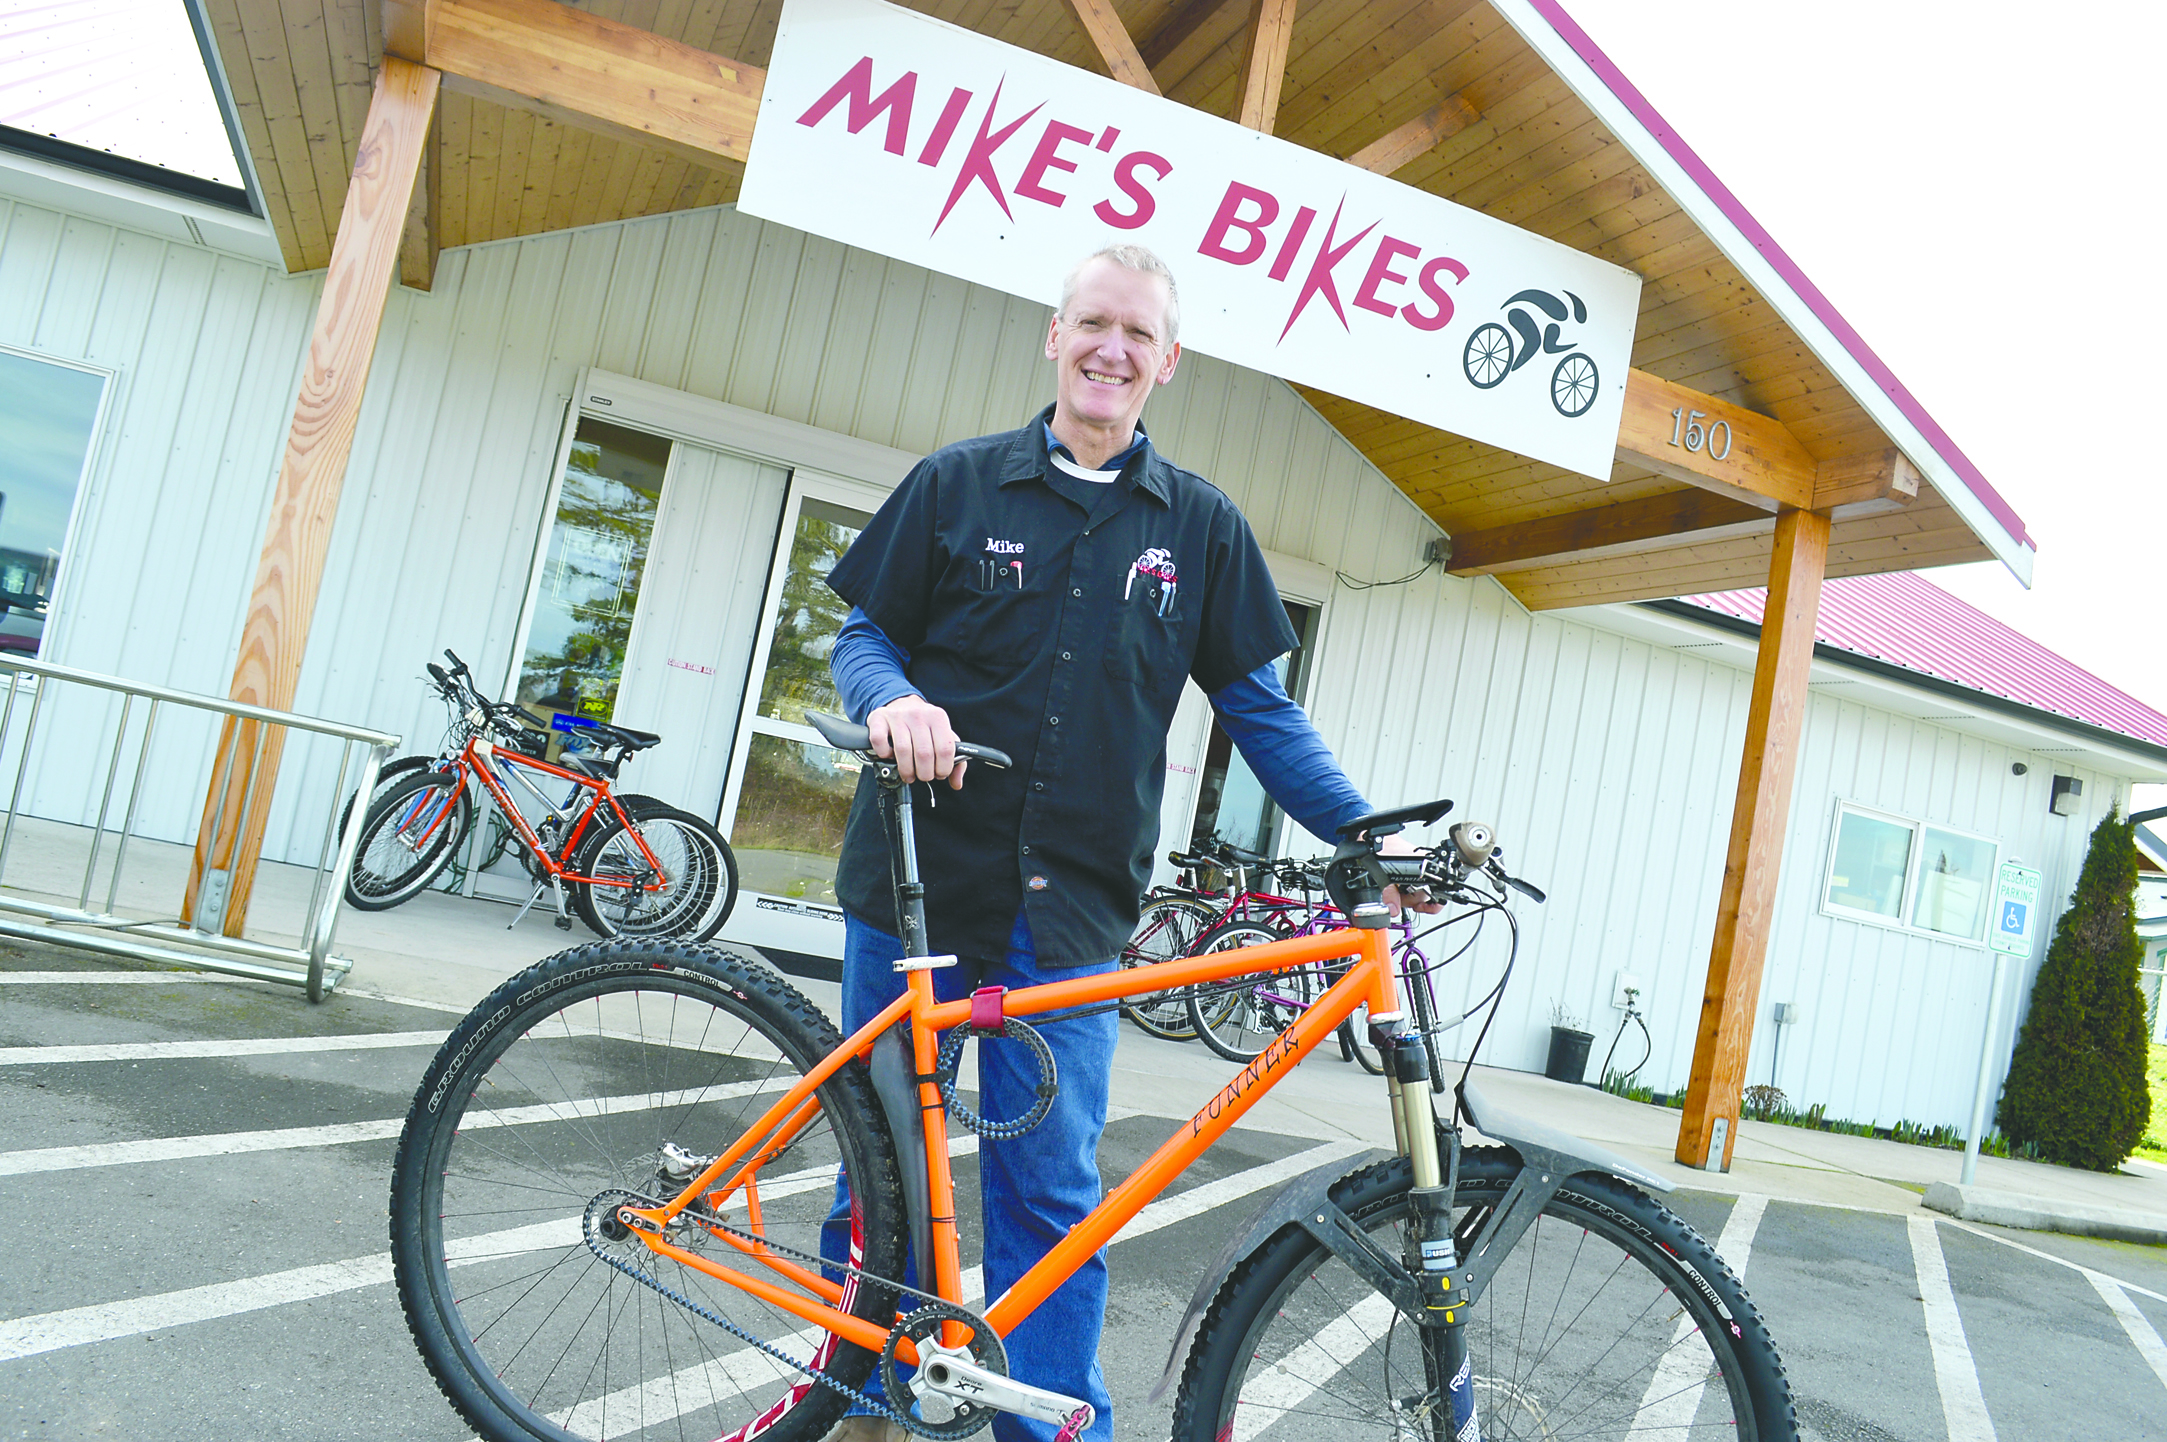 Mike Wanner of Mike’s Bikes in Sequim is changing his shop’s name because a California chain trademarked the “Mike’s Bikes” name.  -- Photo by Joe Smillie/Peninsula Daily News